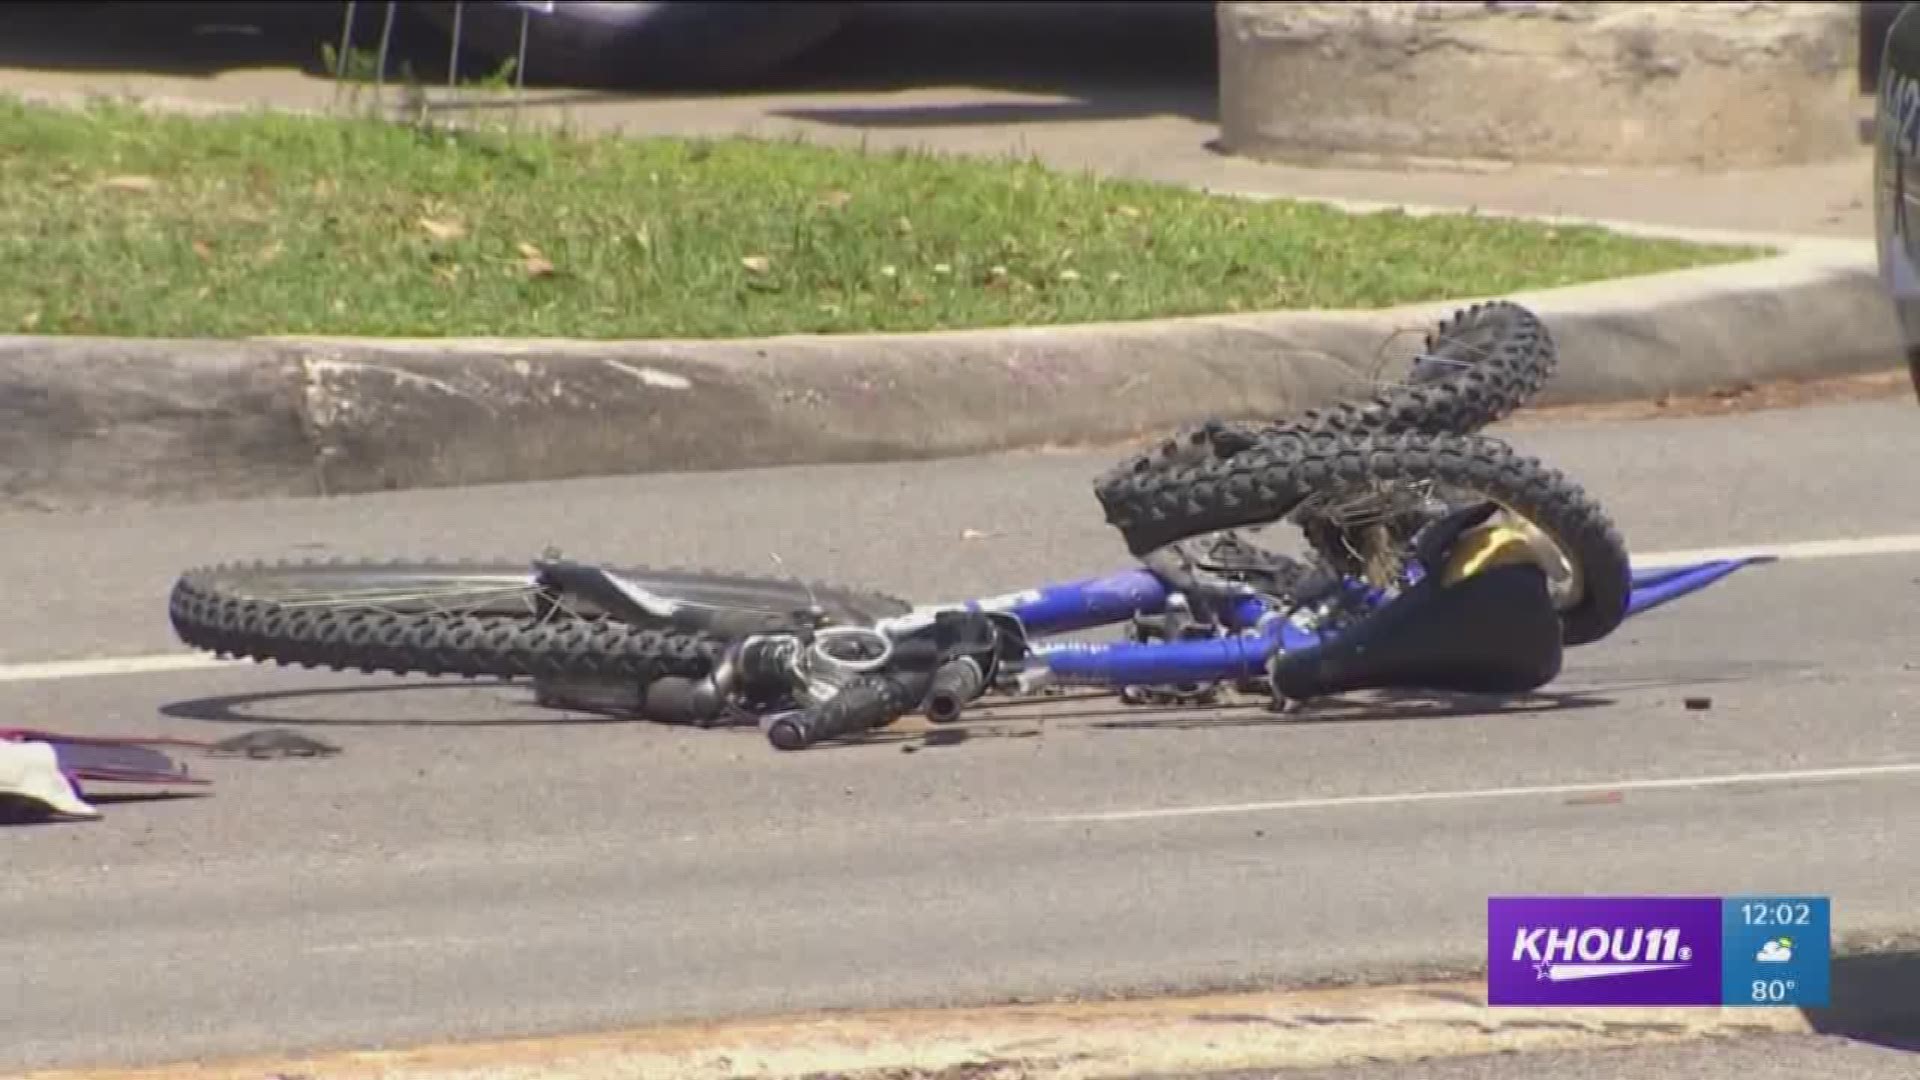 Dozens of Rice University students and cyclists called for safety upgrades at an intersection near campus after two cyclists have been killed there in the last 15 months.